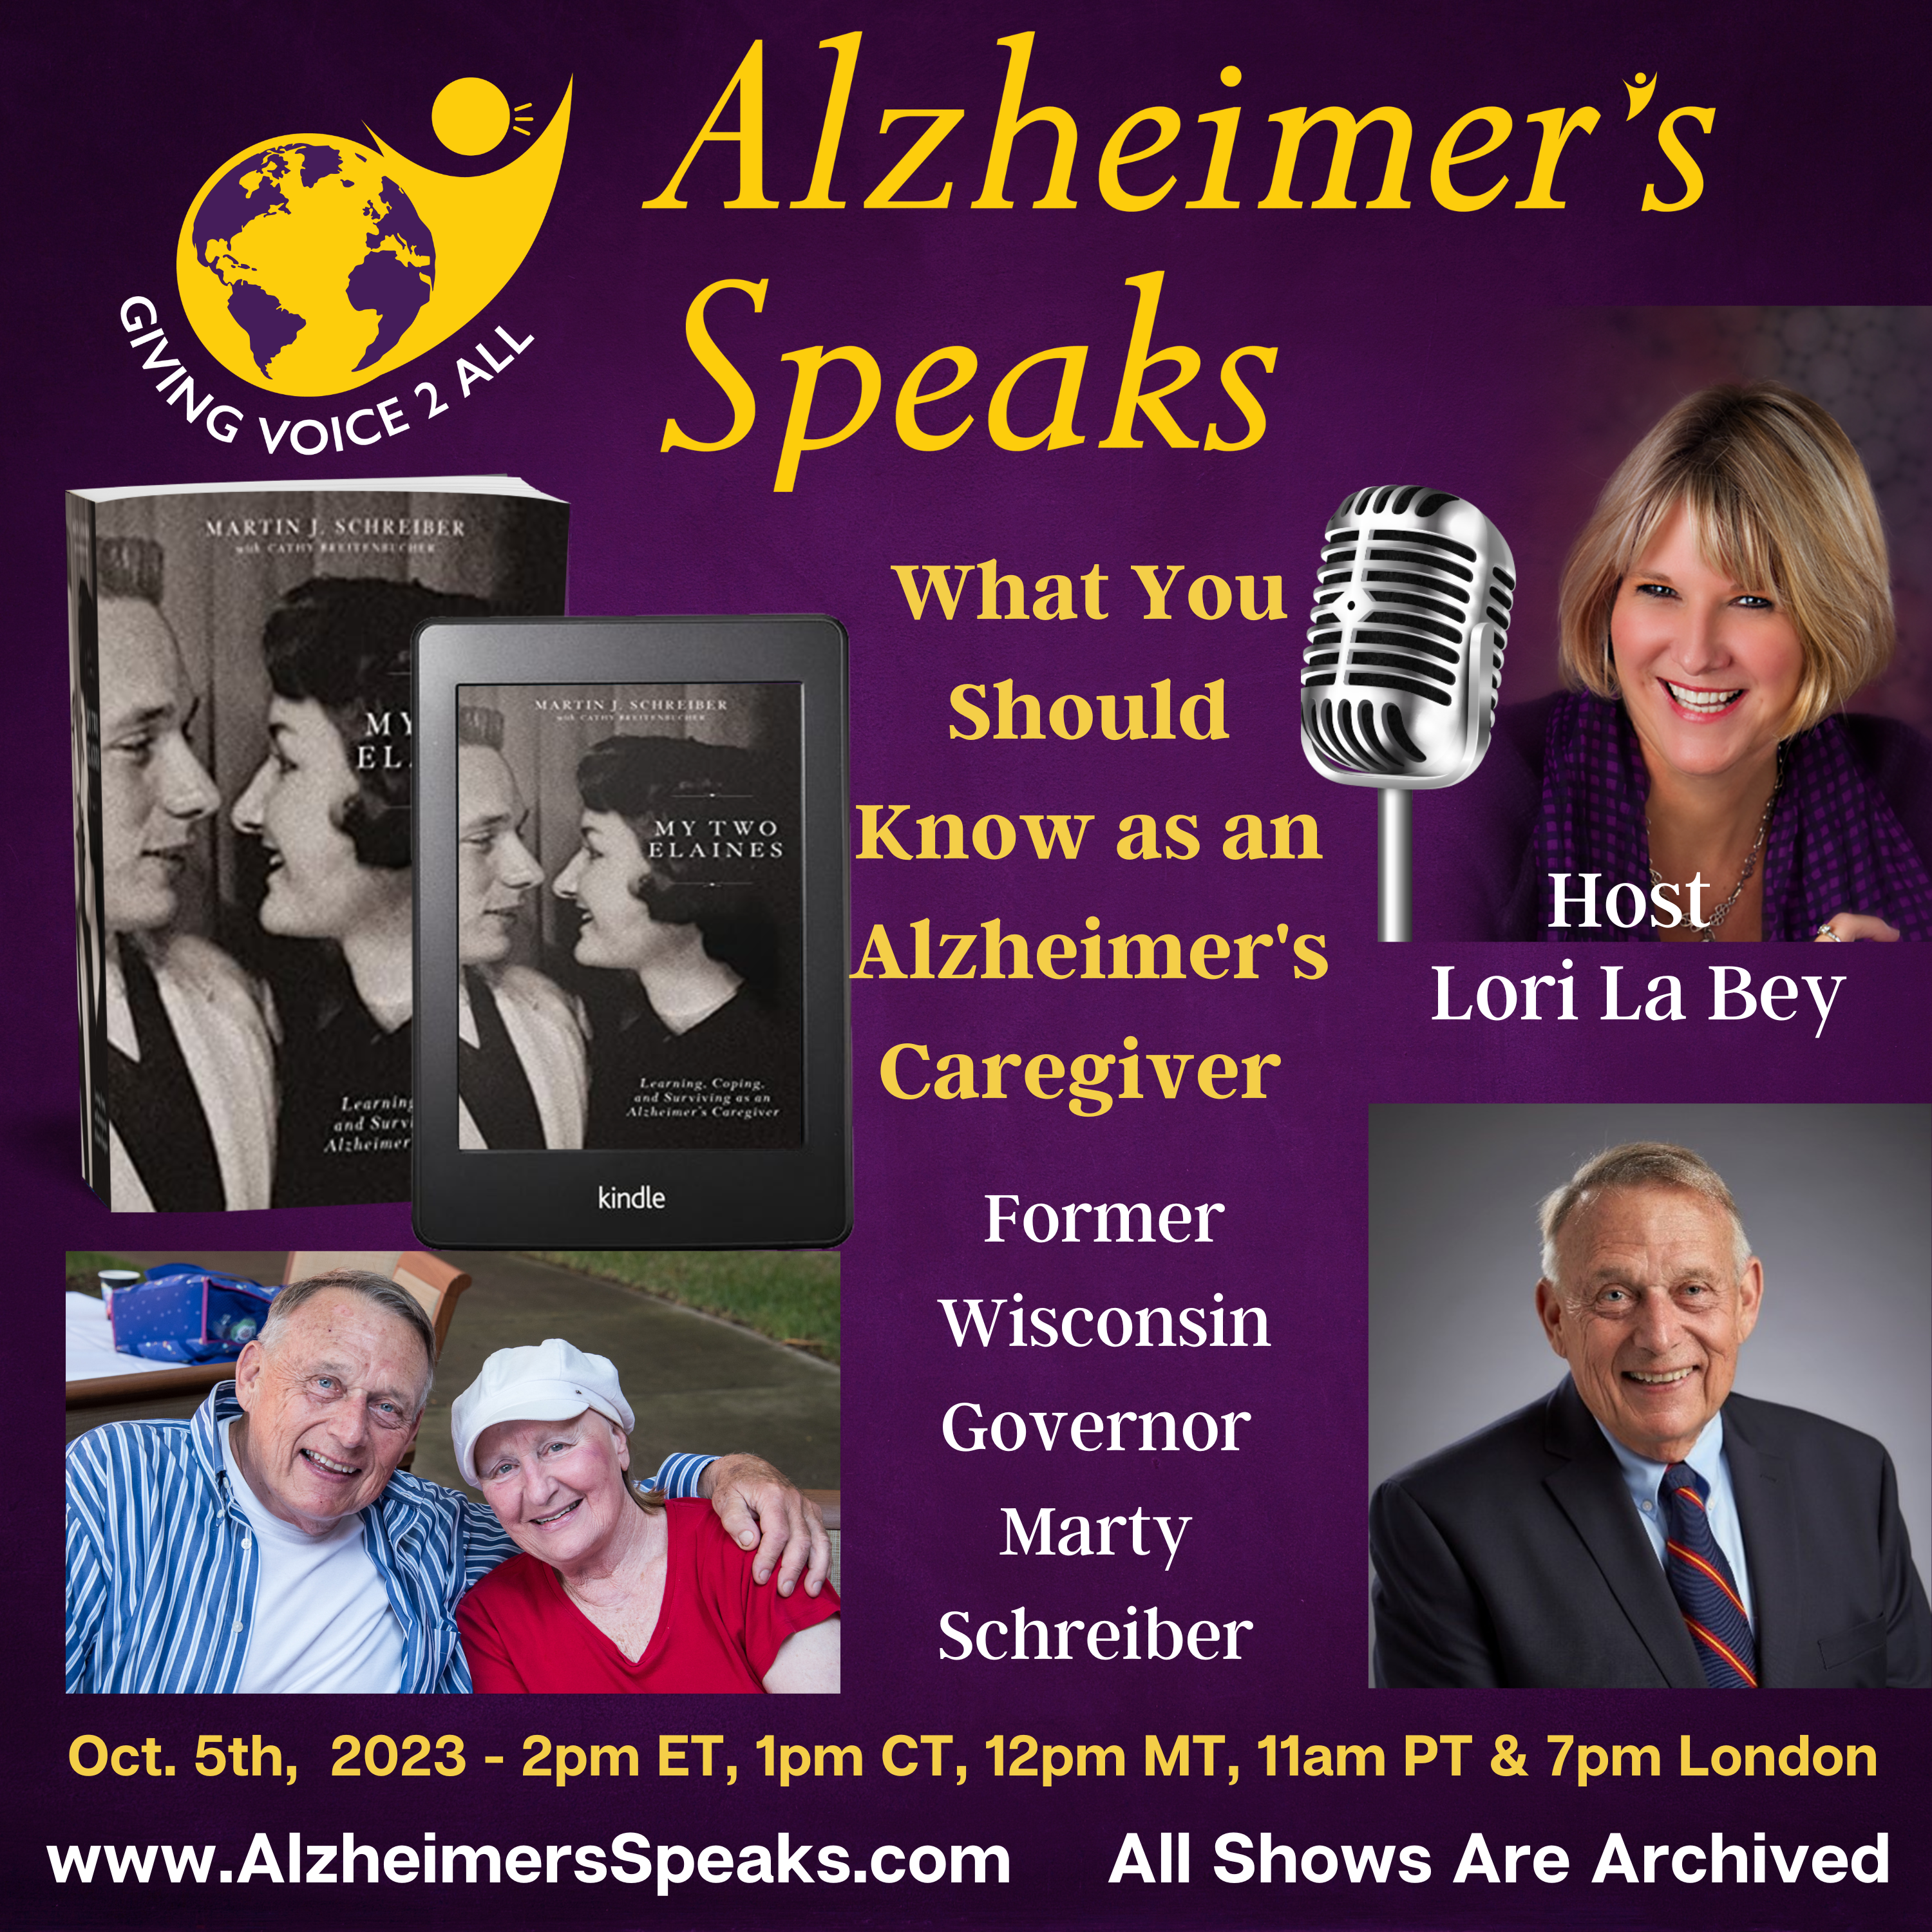 What You Should Know as an Alzheimer’s Caregiver